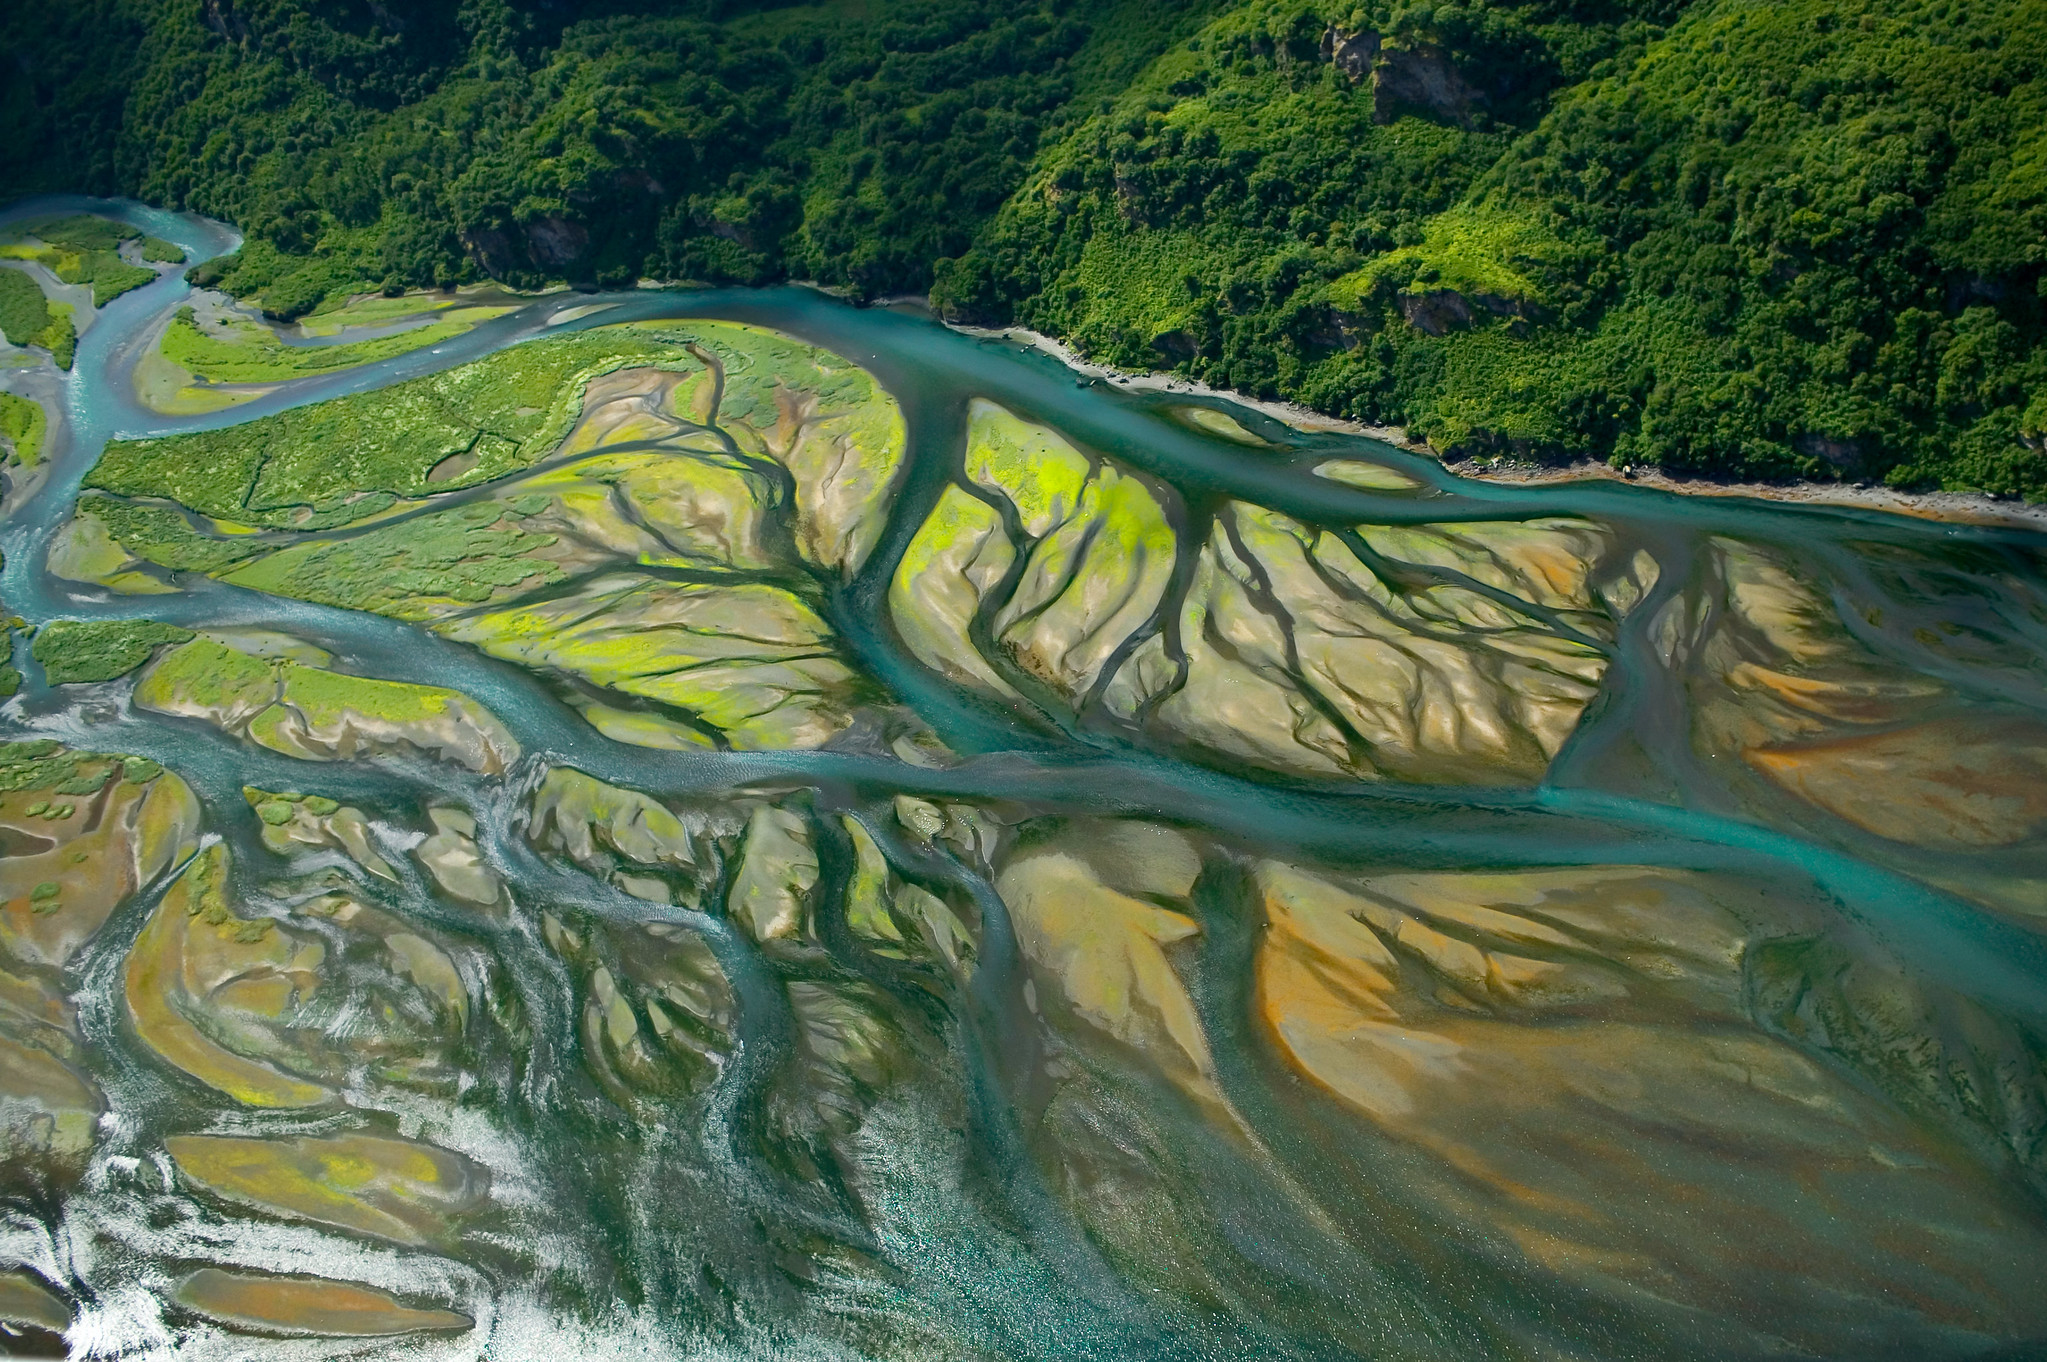 A glacial river branches out in a broad coastal delta and meets the North Pacific Ocean. Credit: Steve Hillebrand/USFWS,